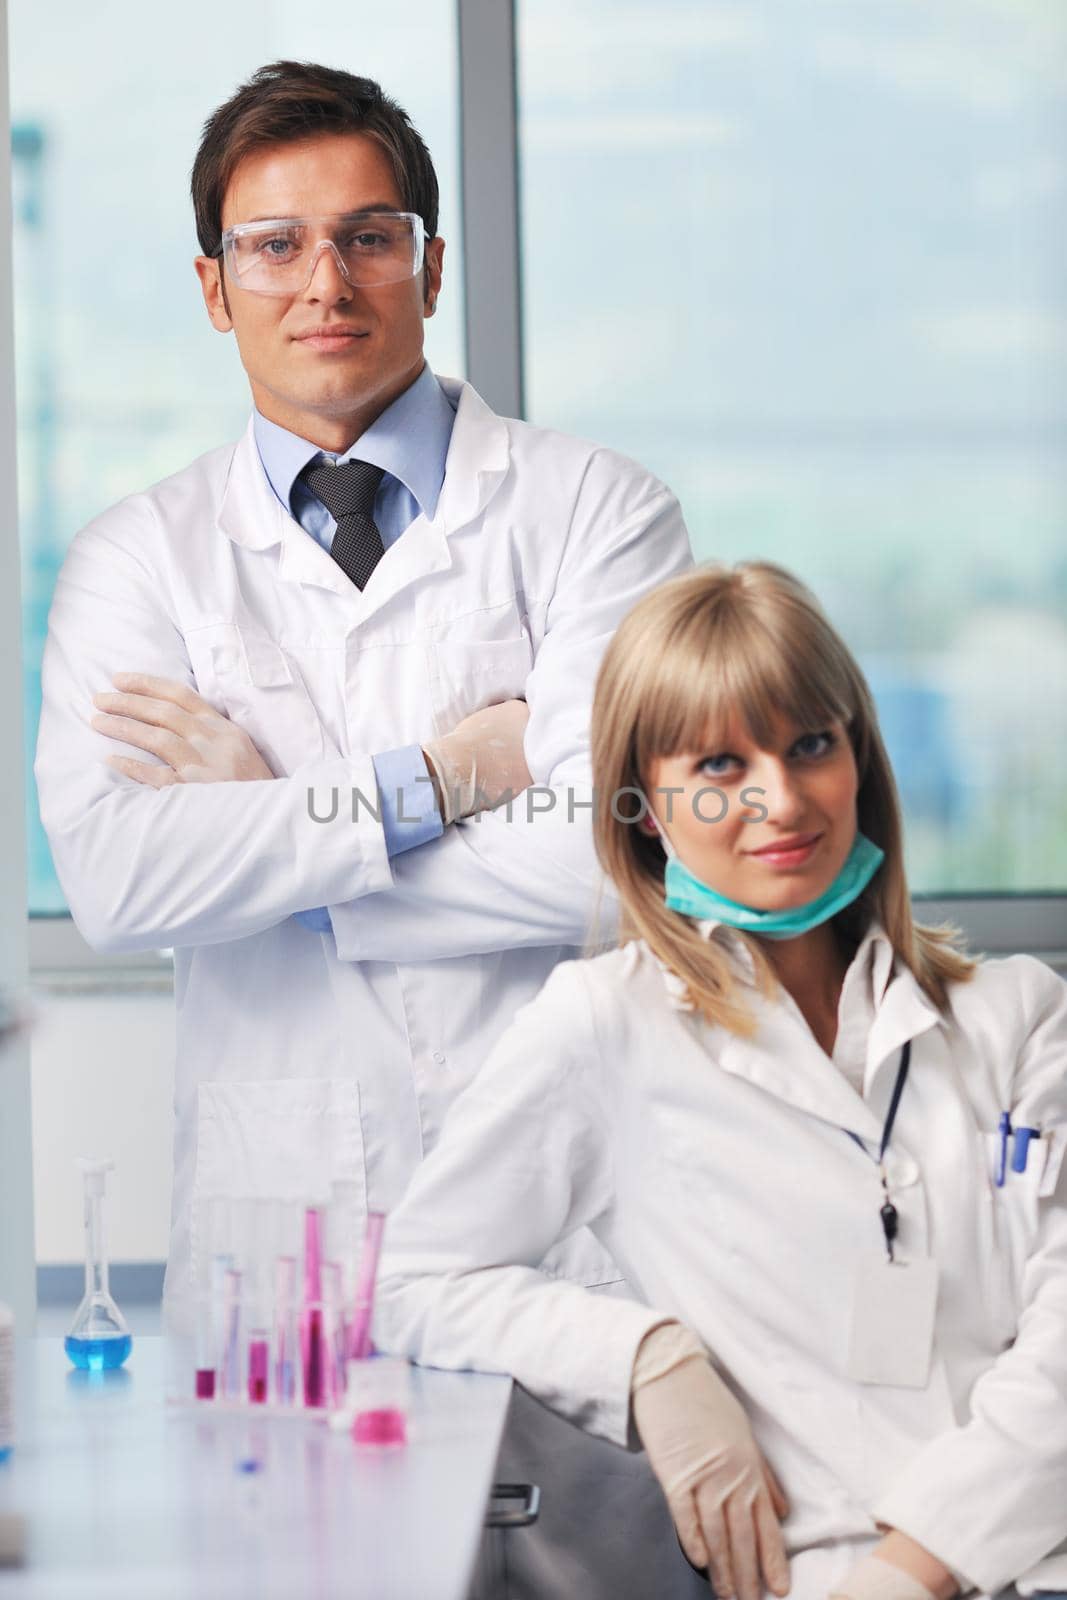 science and research biology chemistry an dmedicine  youn people couple in bright modern  lab